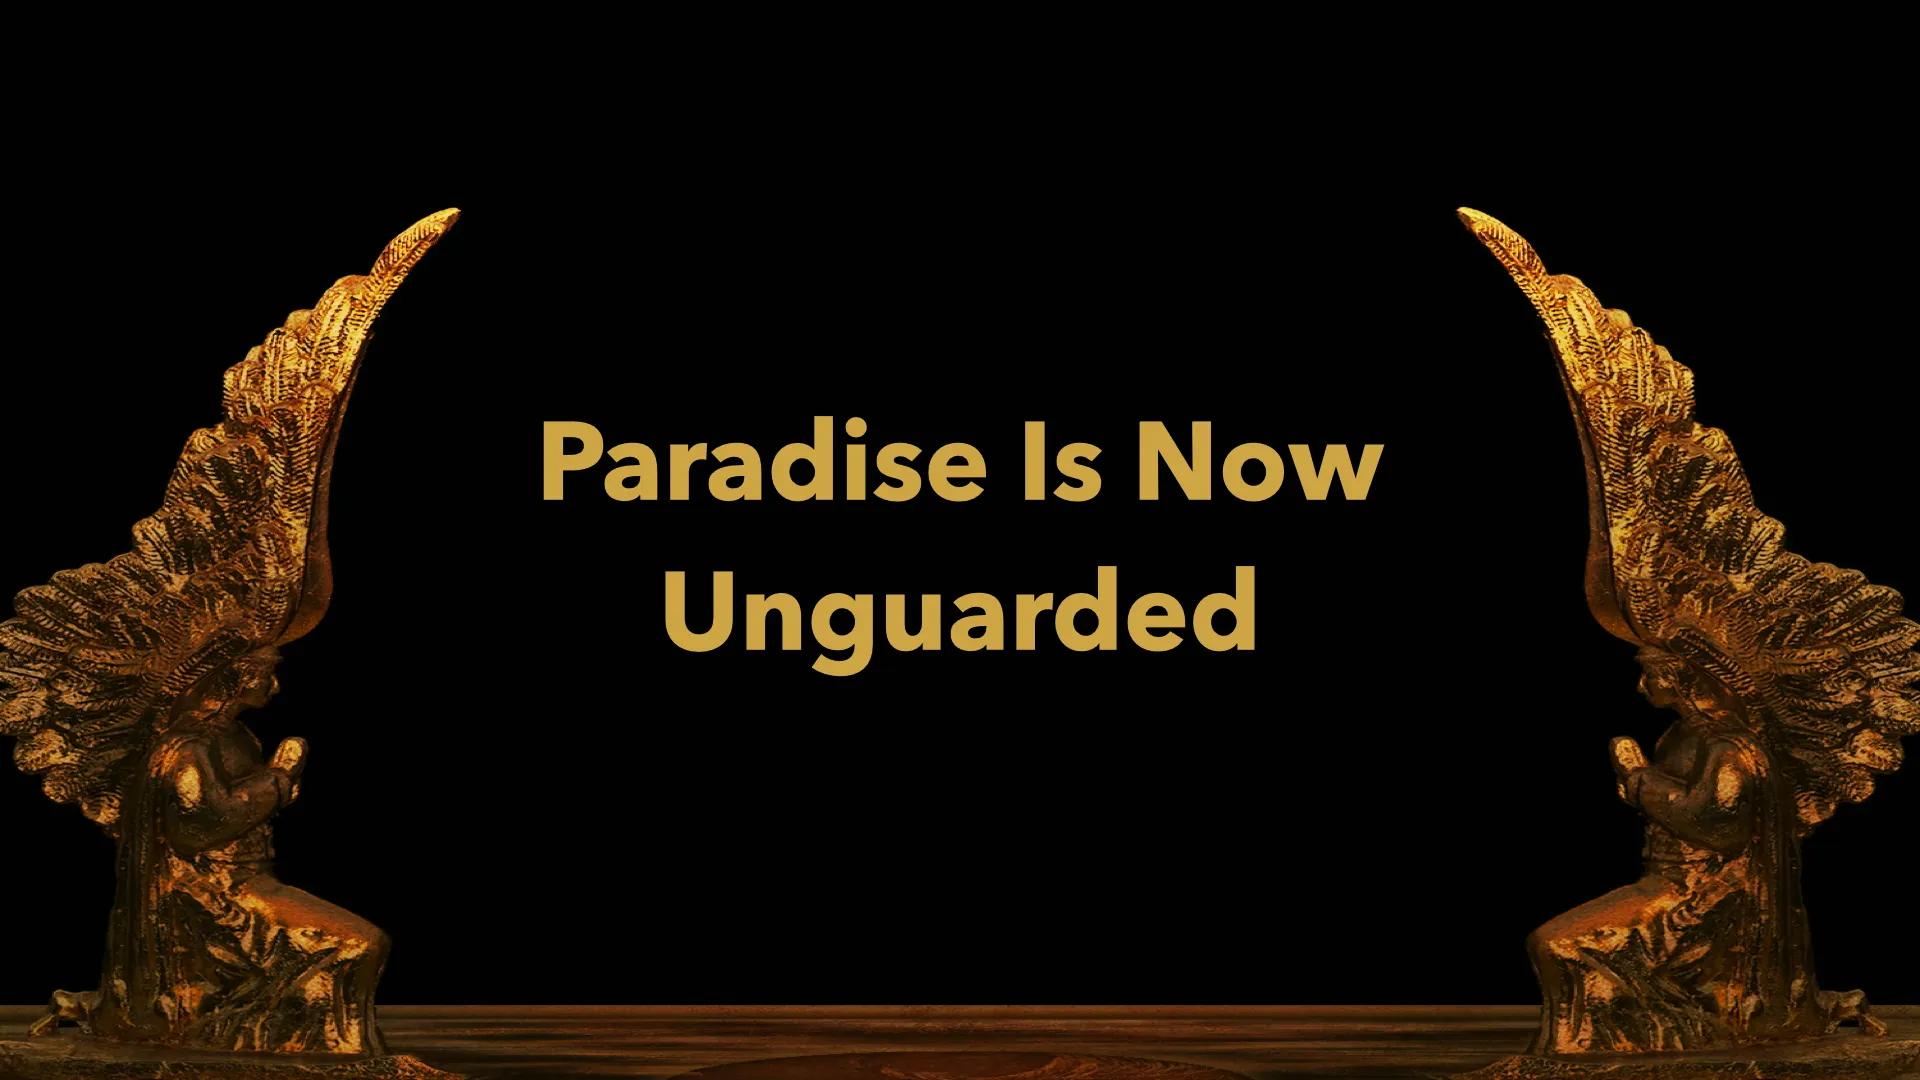 Paradise is Now Unguarded